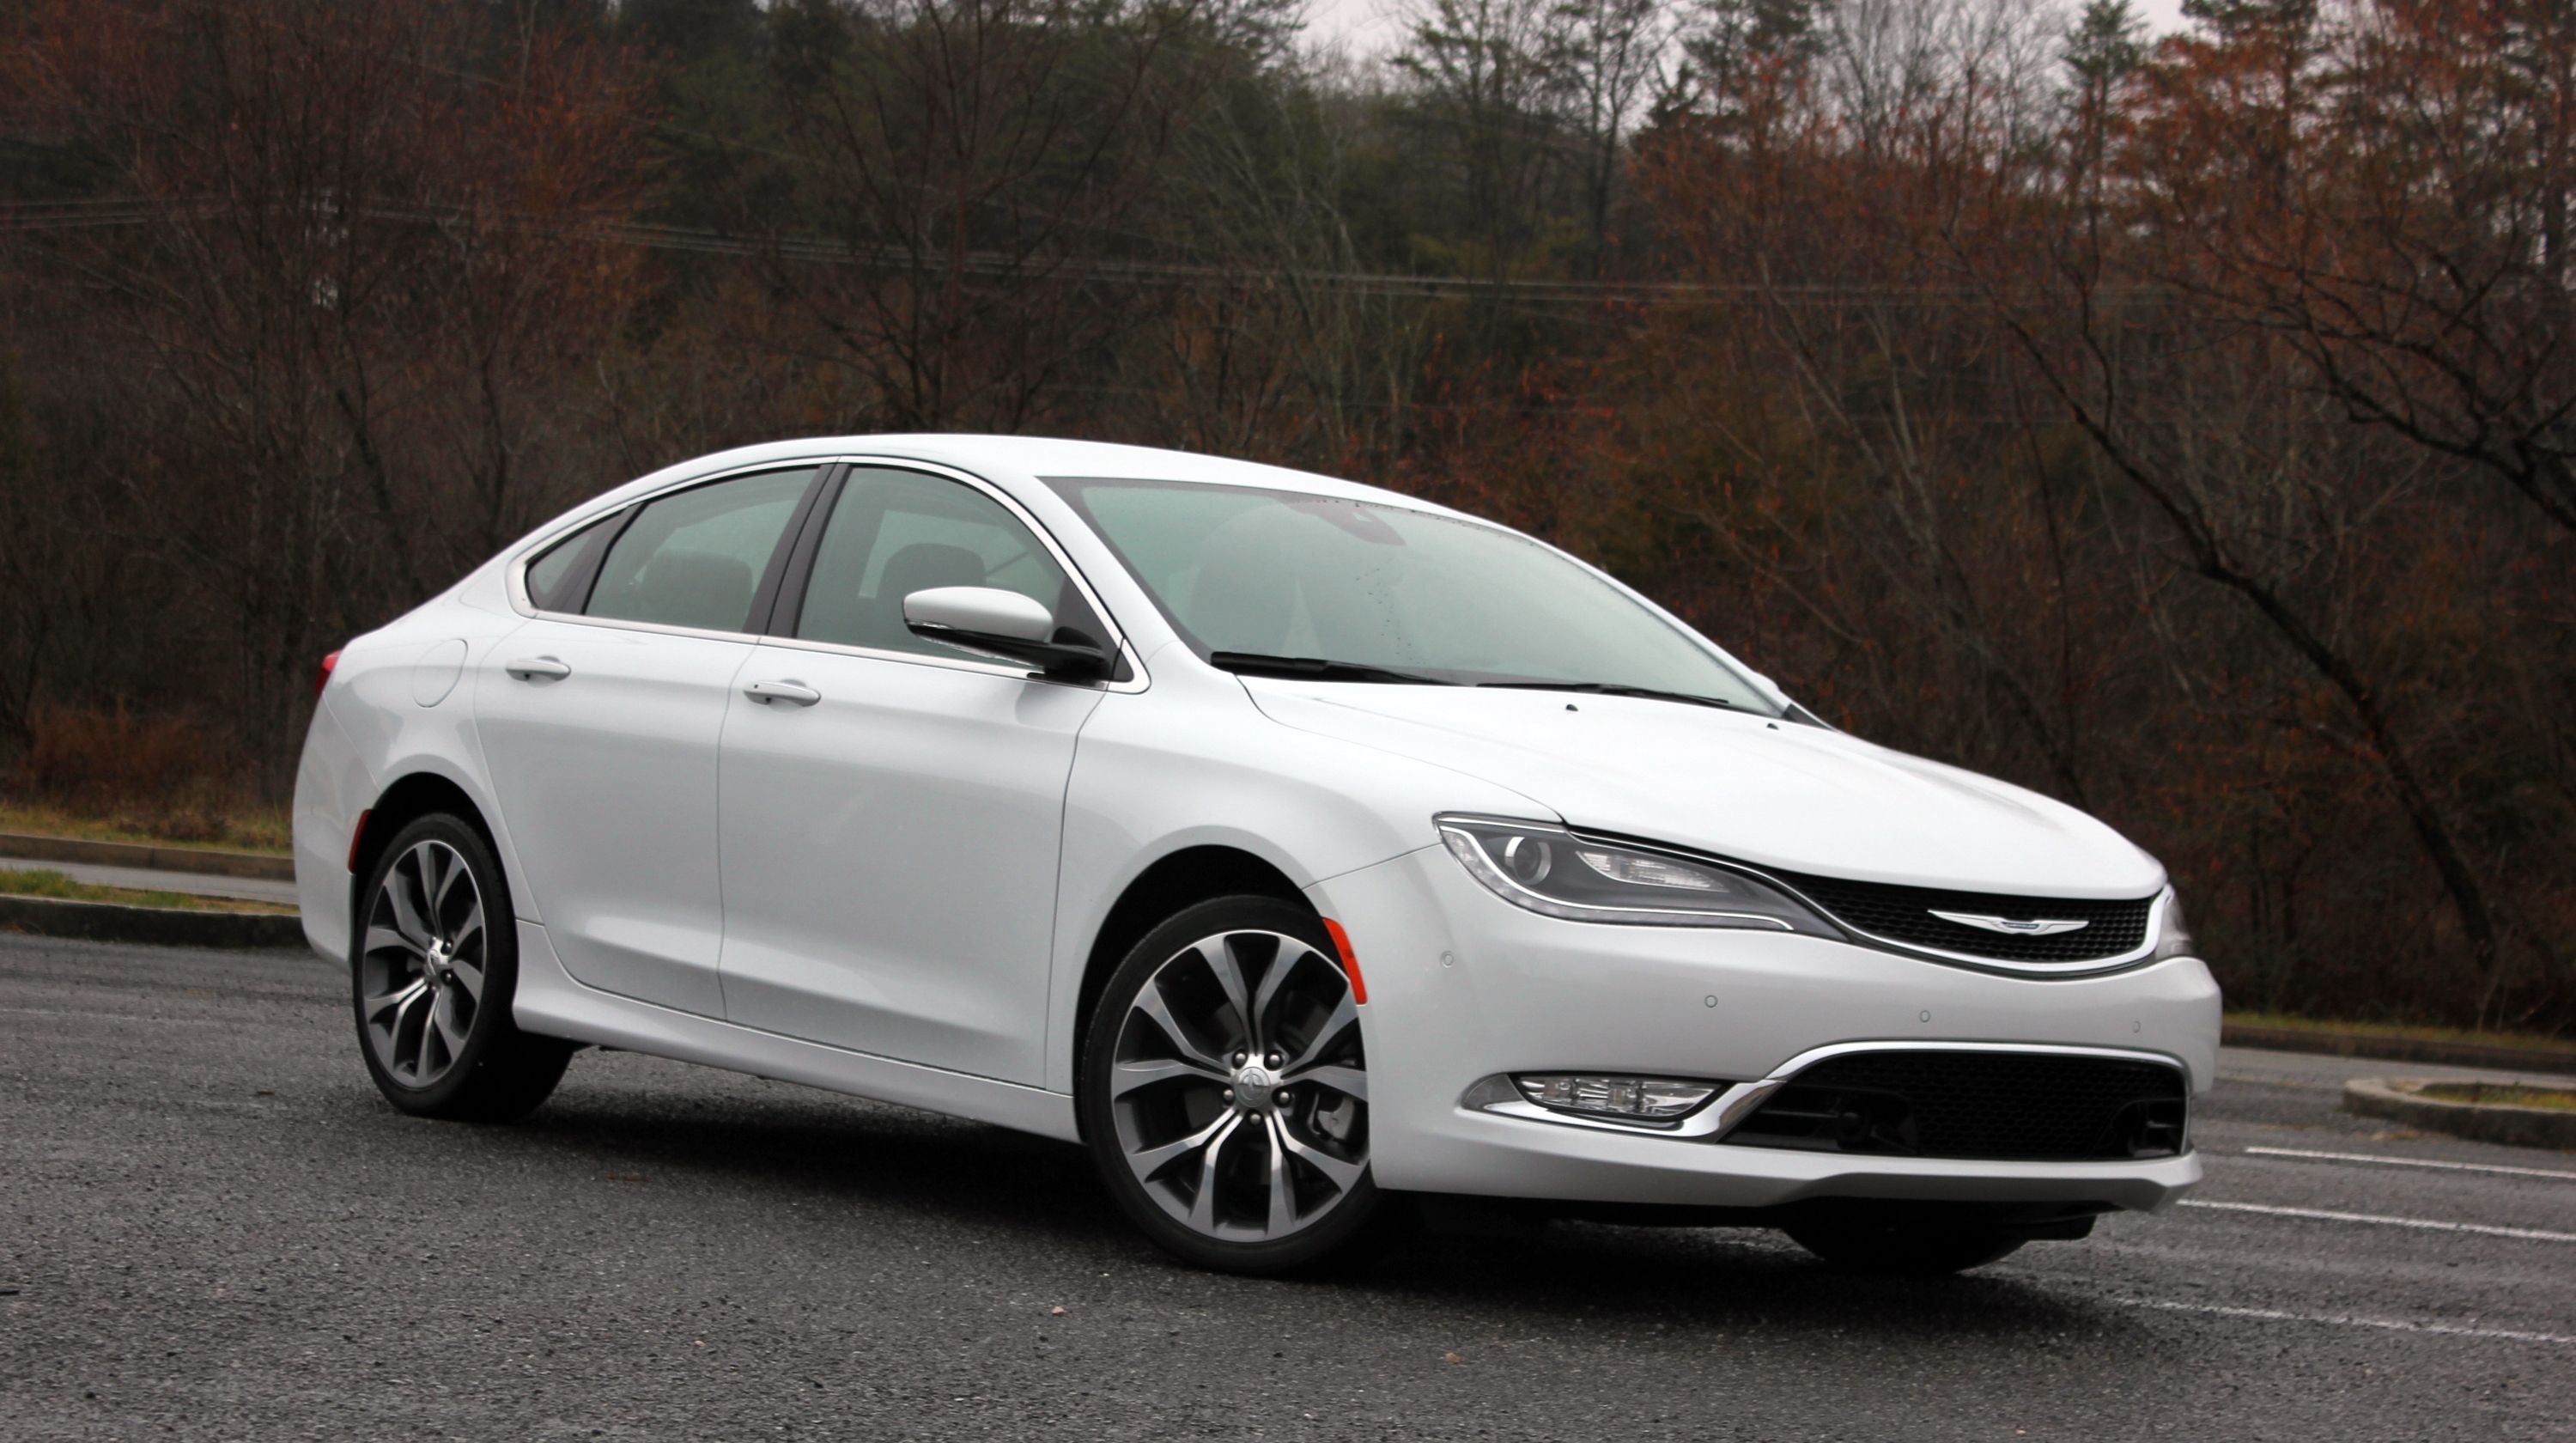  Christian Moe spent a week with the lightly updated 2015 Chrysler 200C. Check out what he thinks of it at TopSpeed.com.